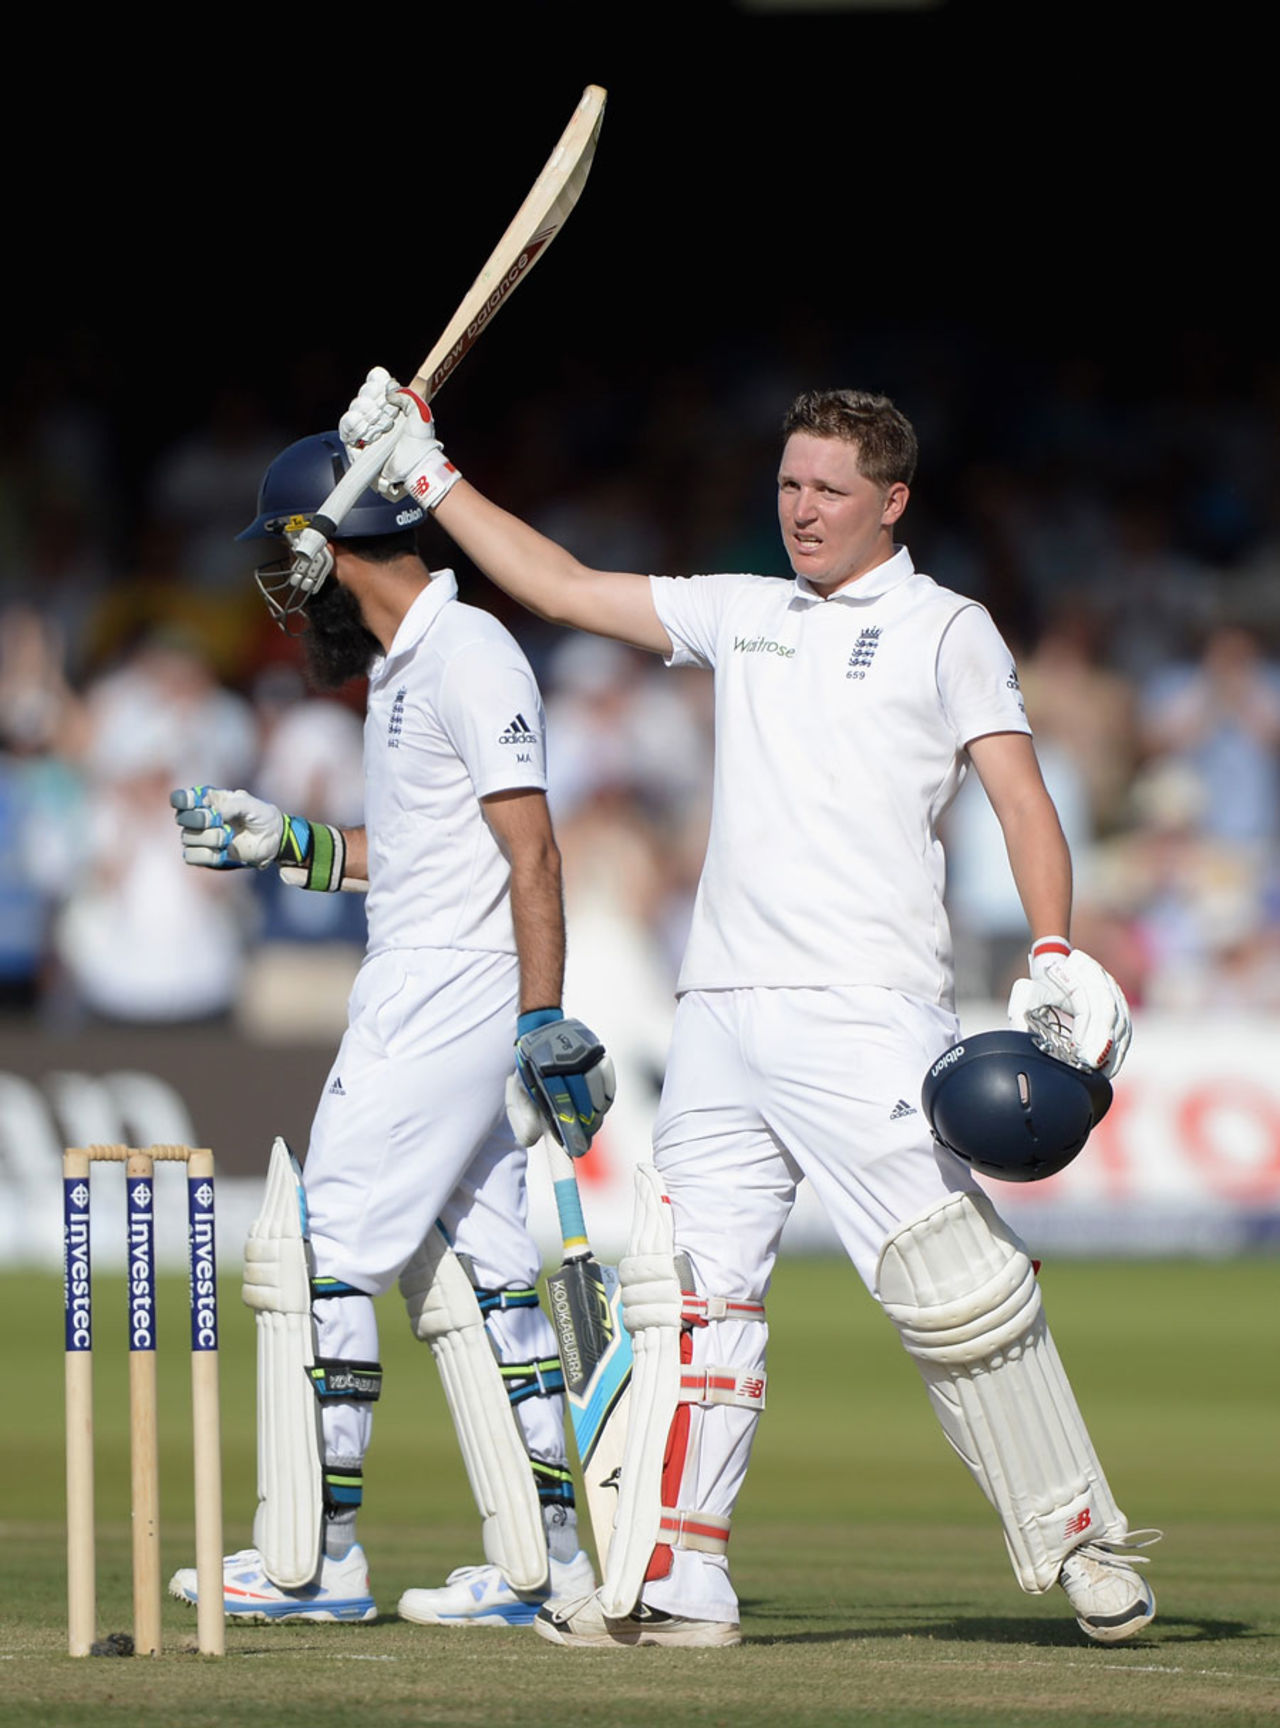 Gary Ballance celebrates his century, England v India, 2nd Investec Test, Lord's, 2nd day, July 18, 2014